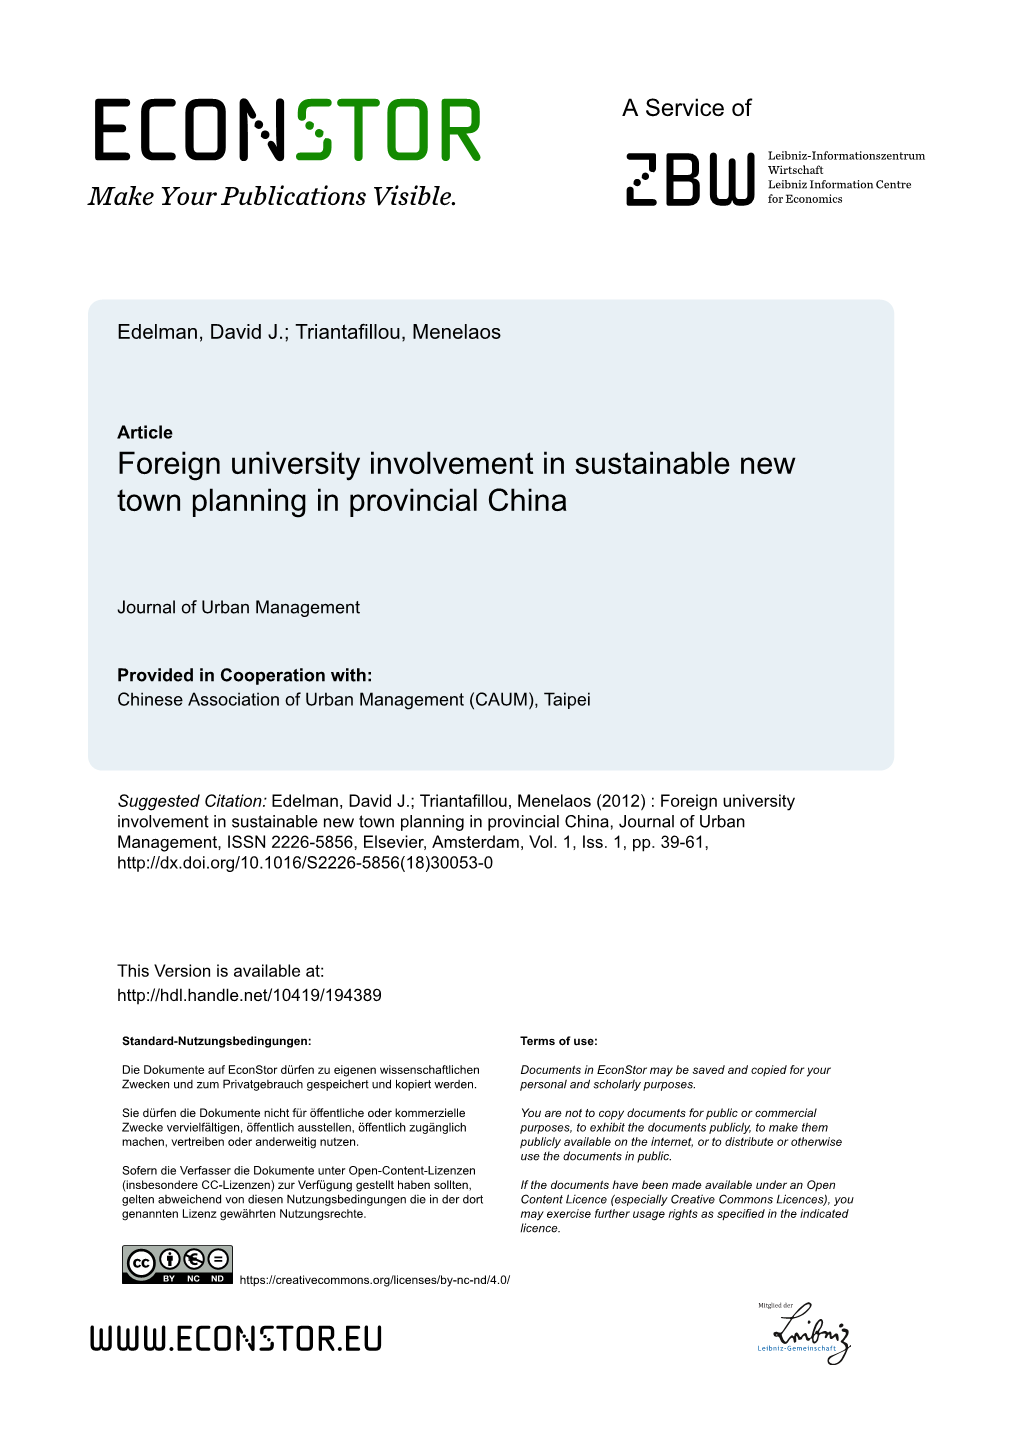 Foreign University Involvement in Sustainable New Town Planning in Provincial China